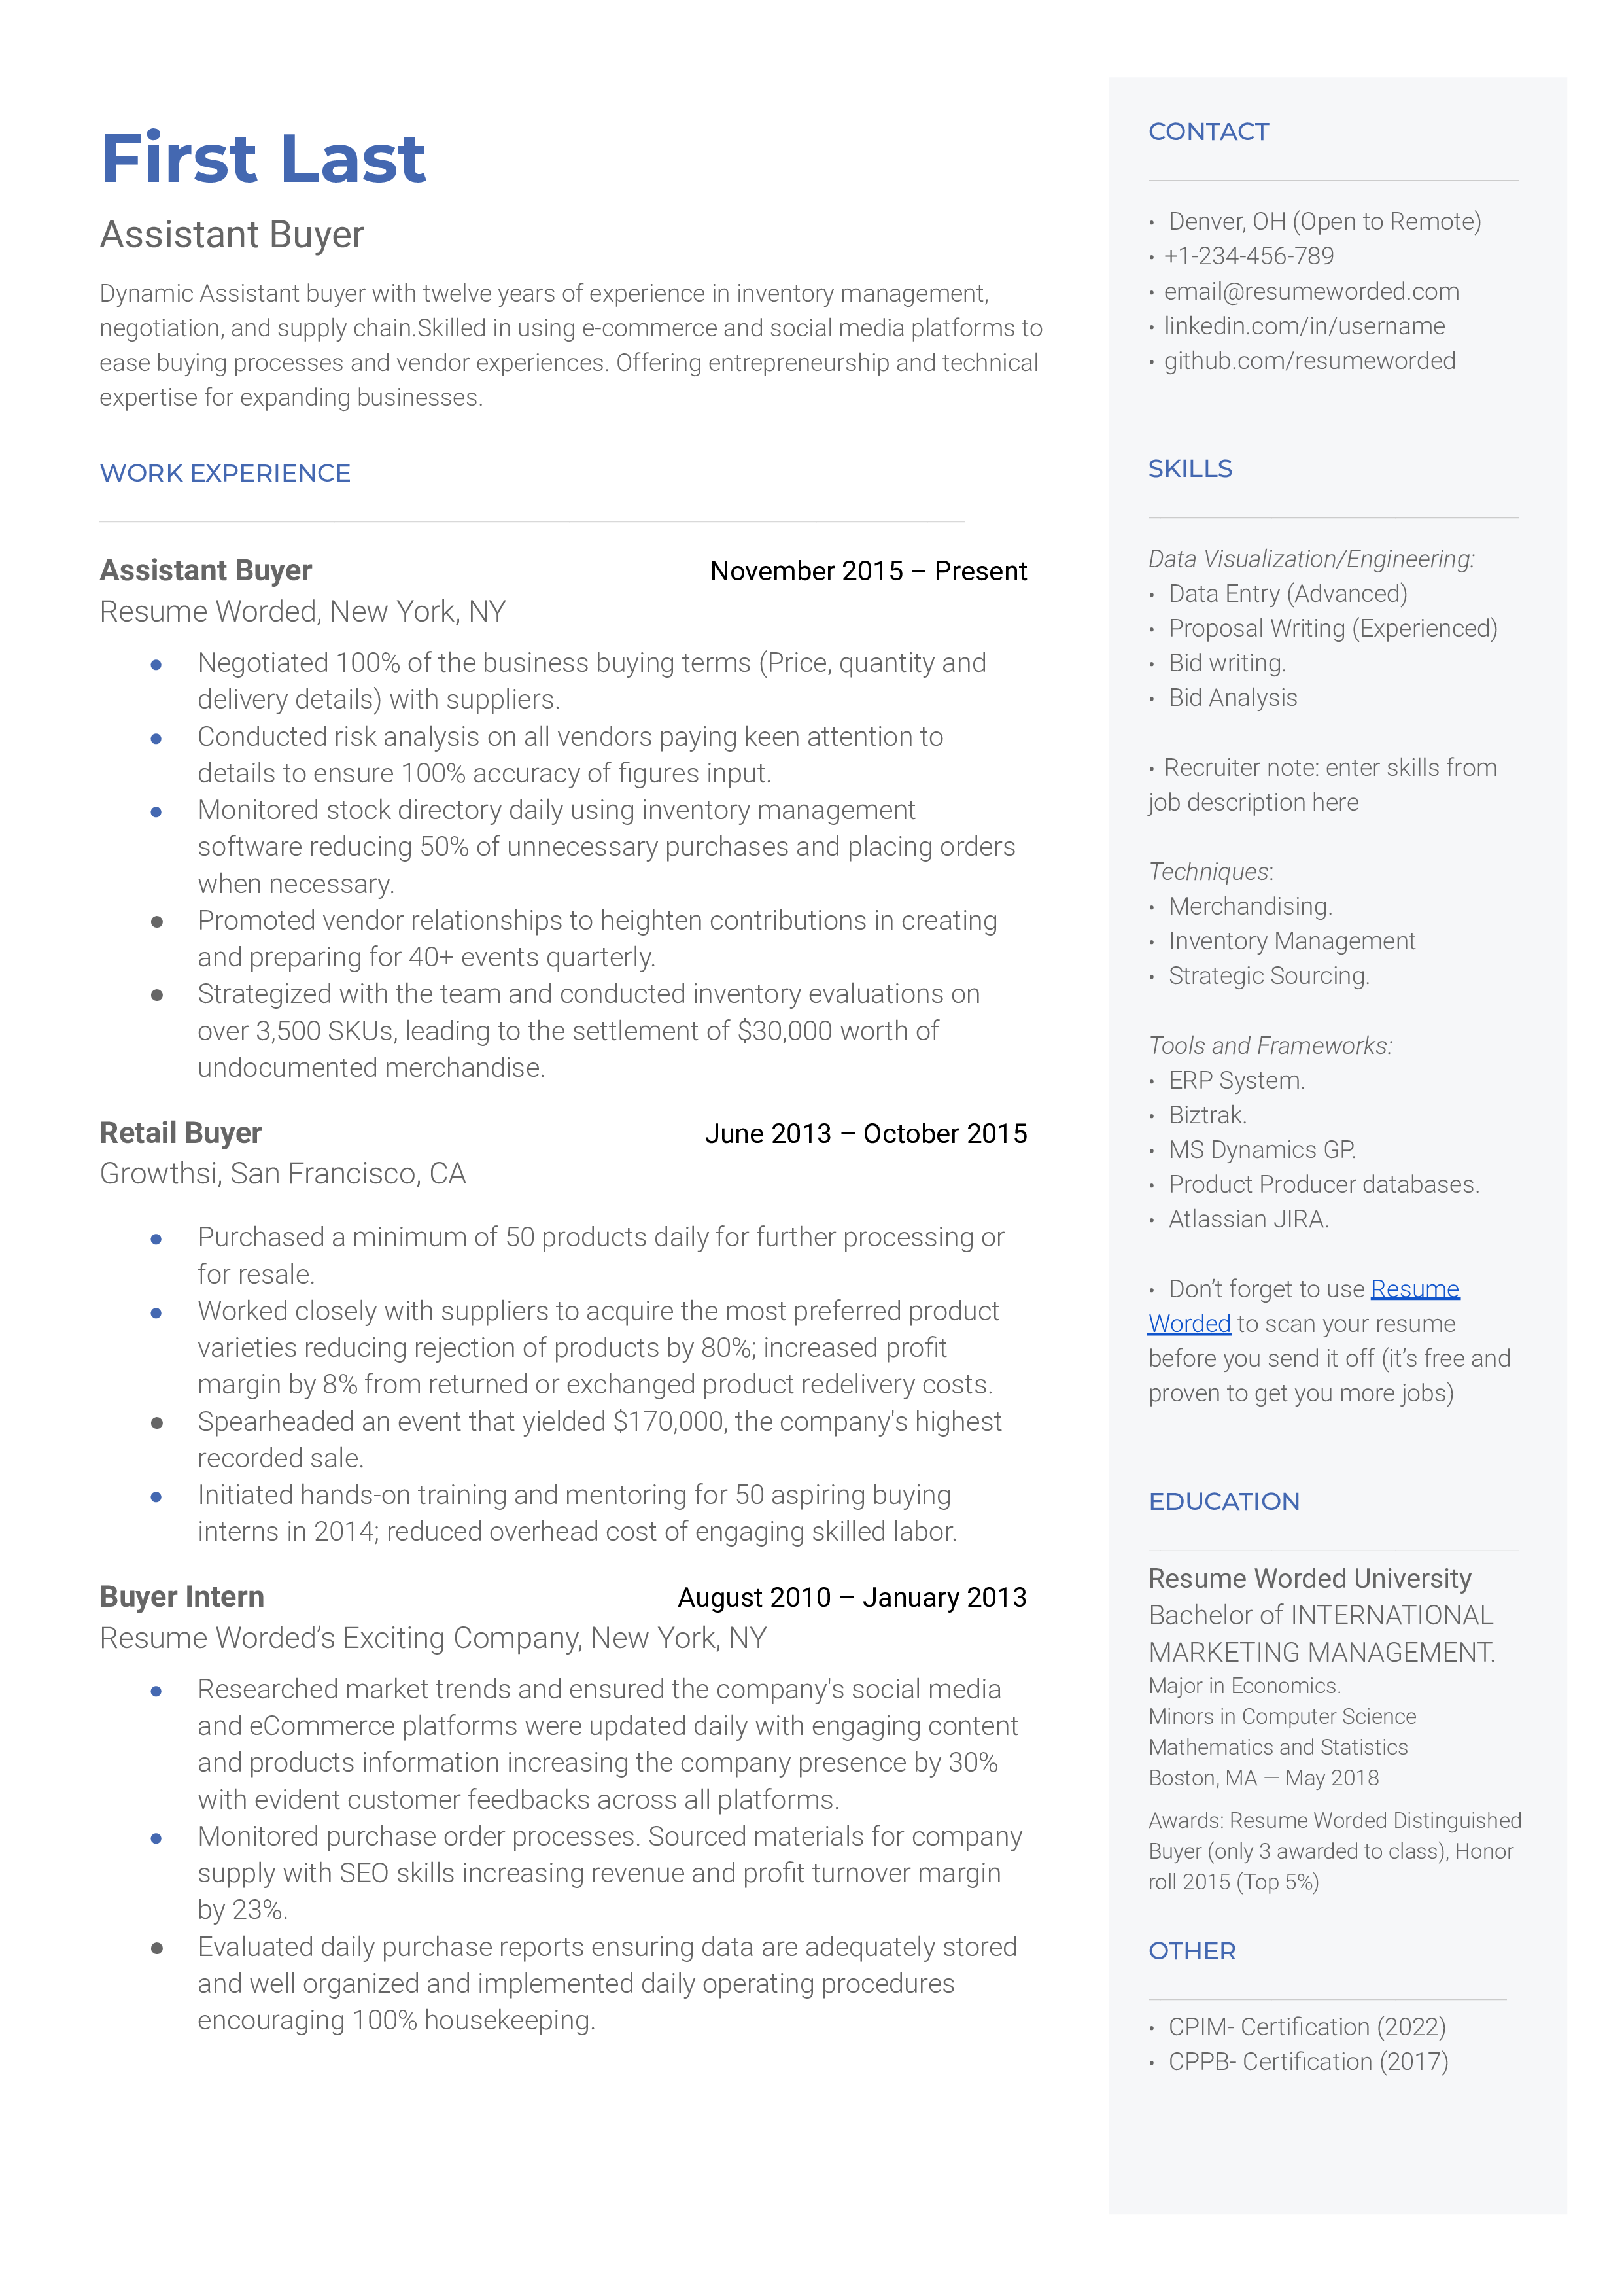 A assistant buyer resume template that highlights skills and education